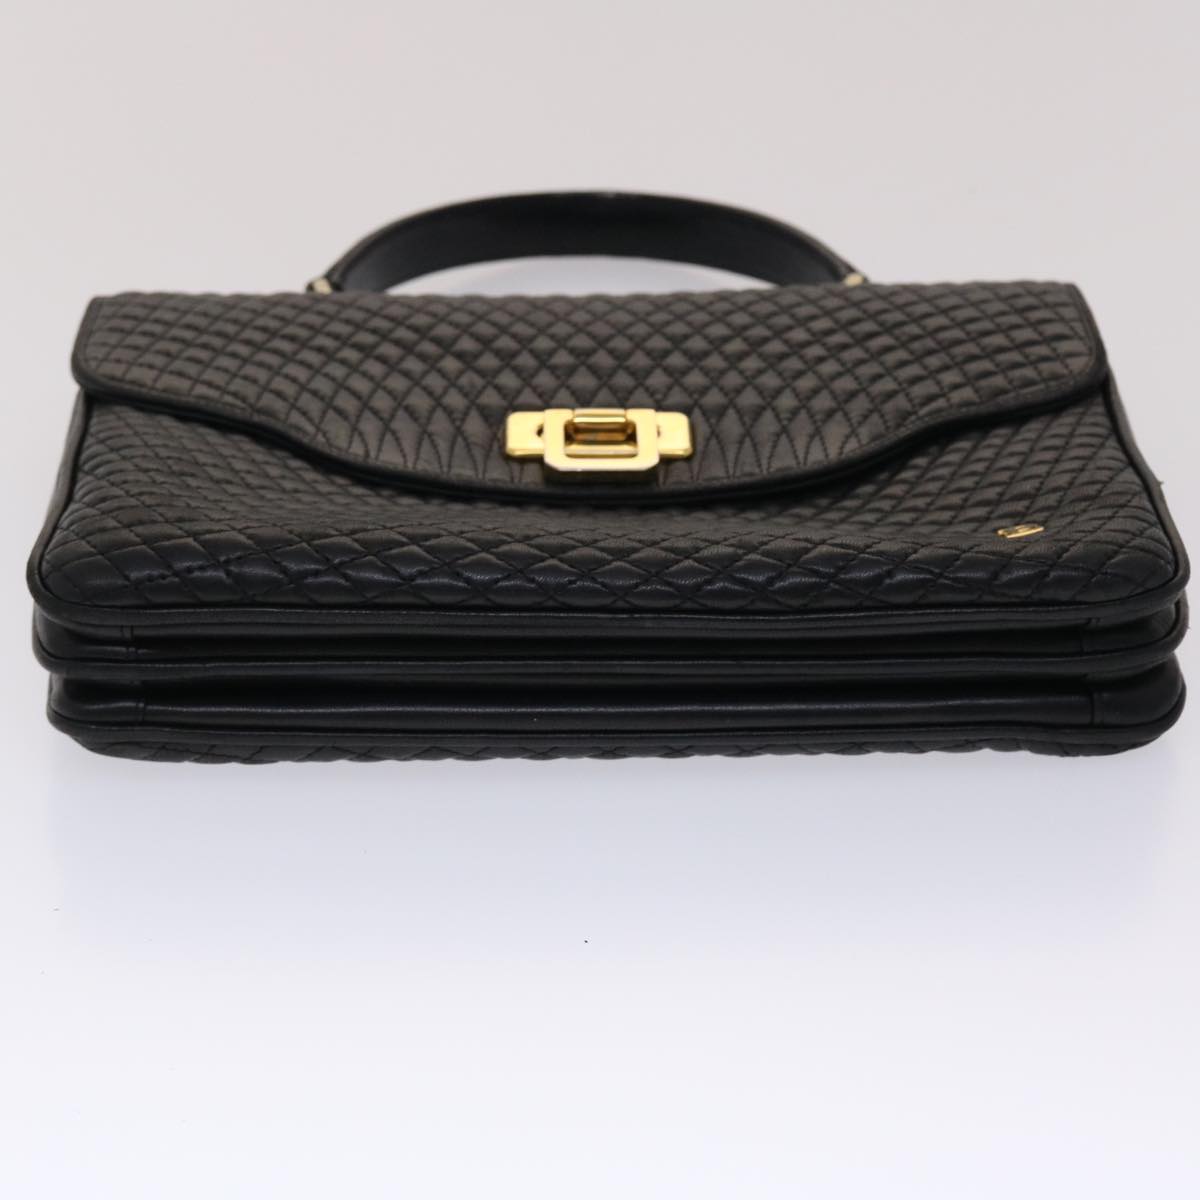 BALLY Quilted Hand Bag Leather Black Auth yk7922